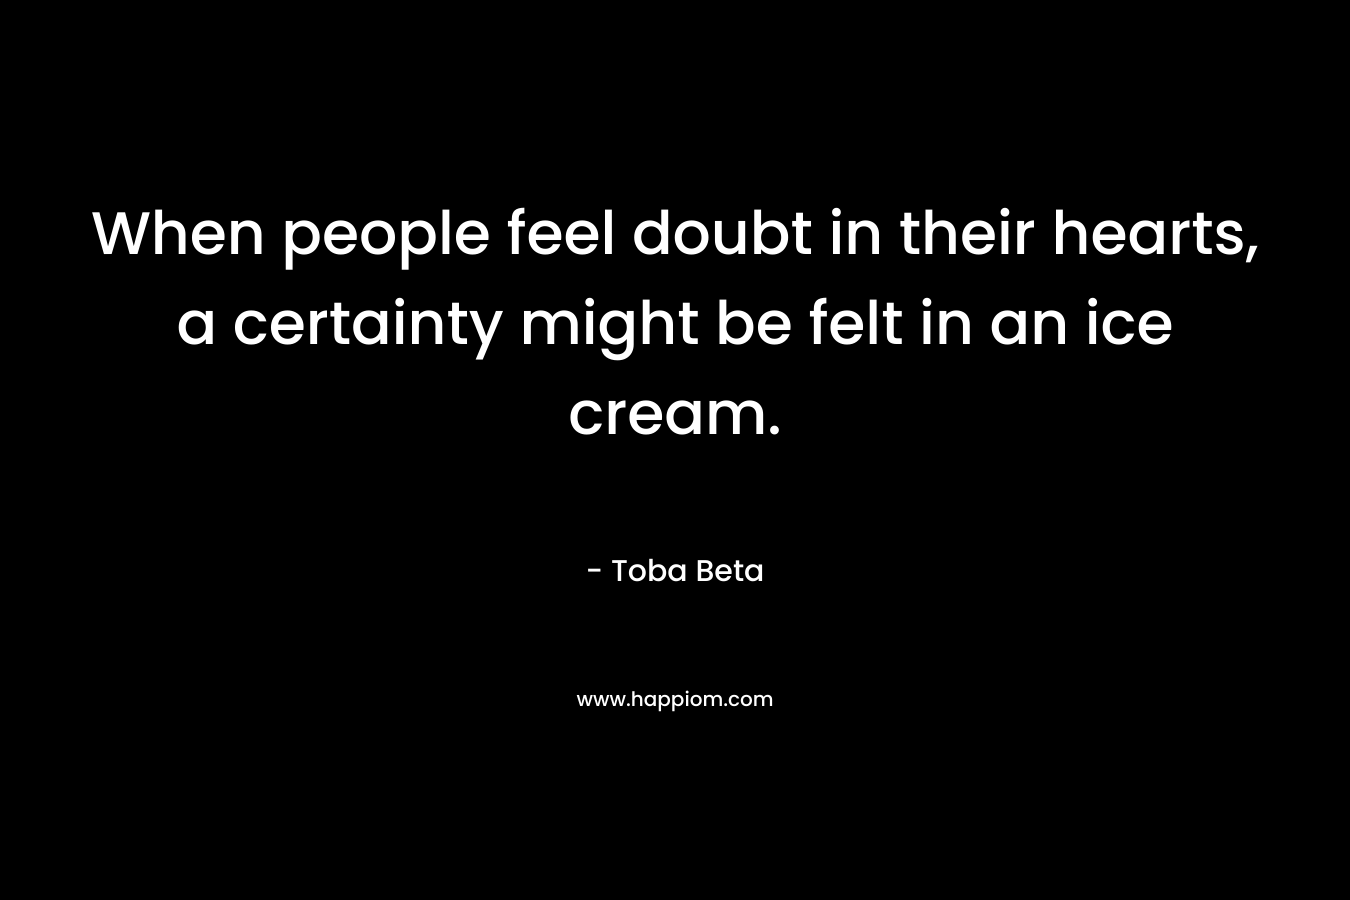 When people feel doubt in their hearts, a certainty might be felt in an ice cream. – Toba Beta